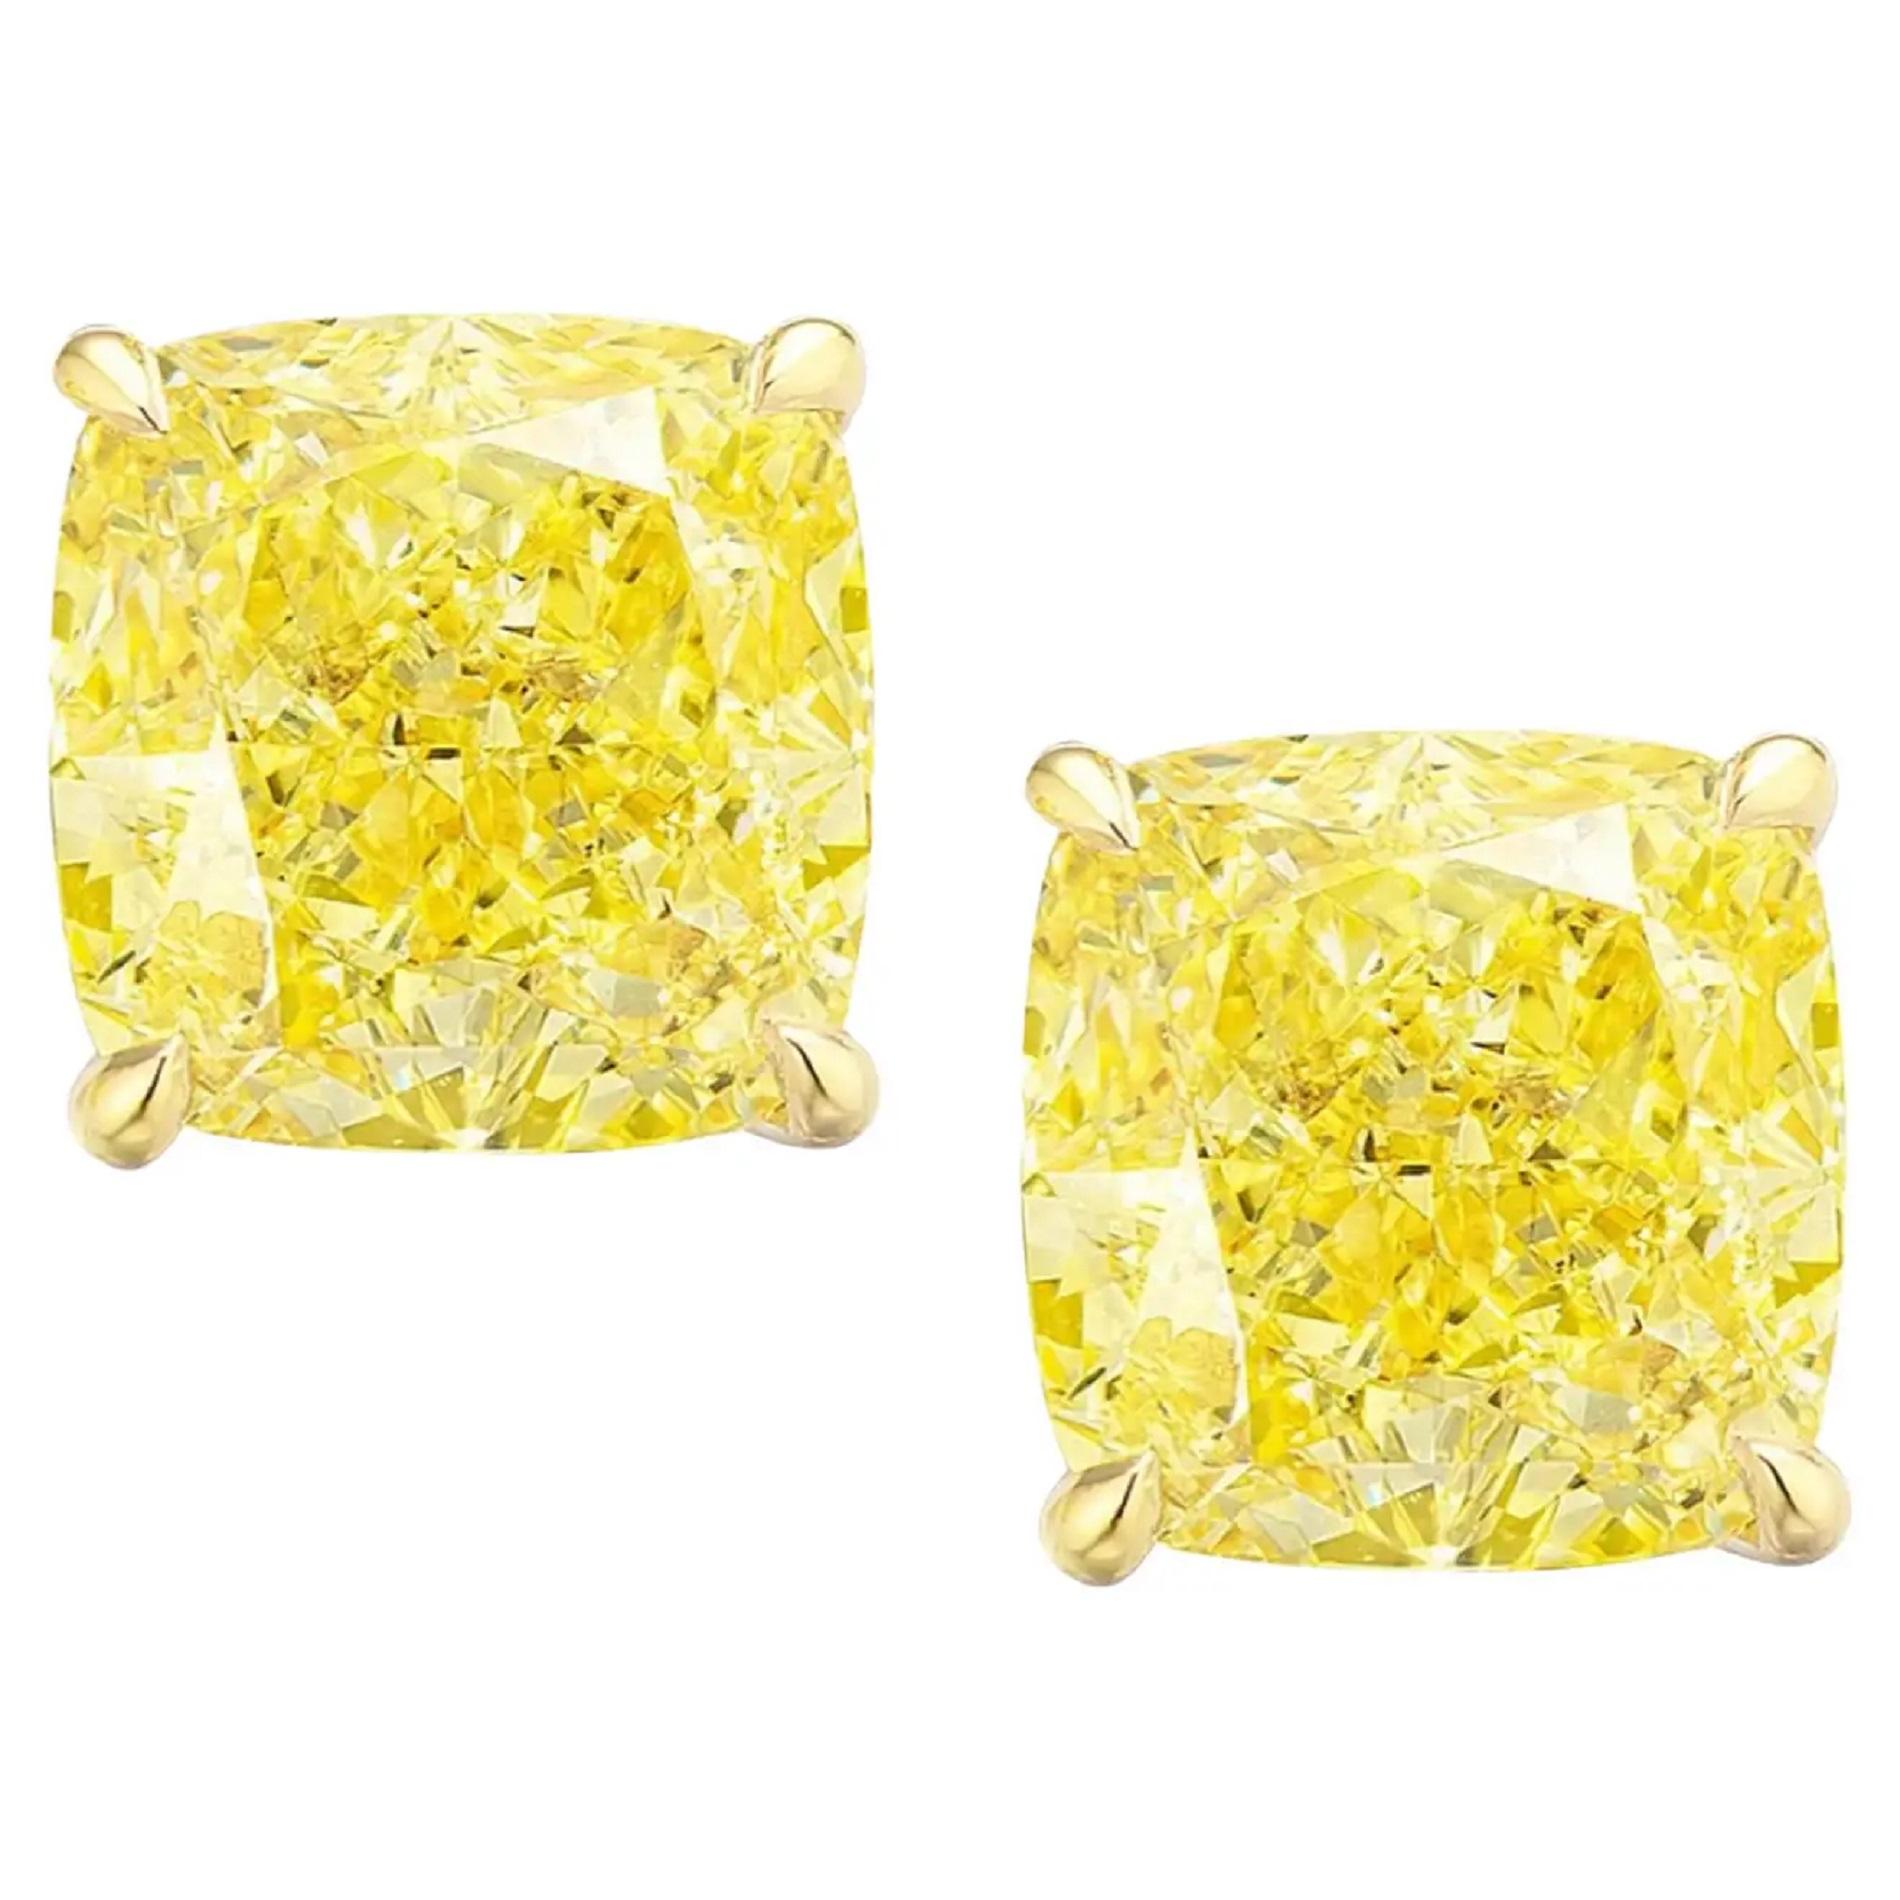 Elevate your elegance with these stunning stud earrings, each adorned with a pair of cushion-cut diamonds, each weighing an impressive 3 carats. The diamonds, boasting a striking Fancy Intense Yellow color, radiate warmth and vibrancy, adding a